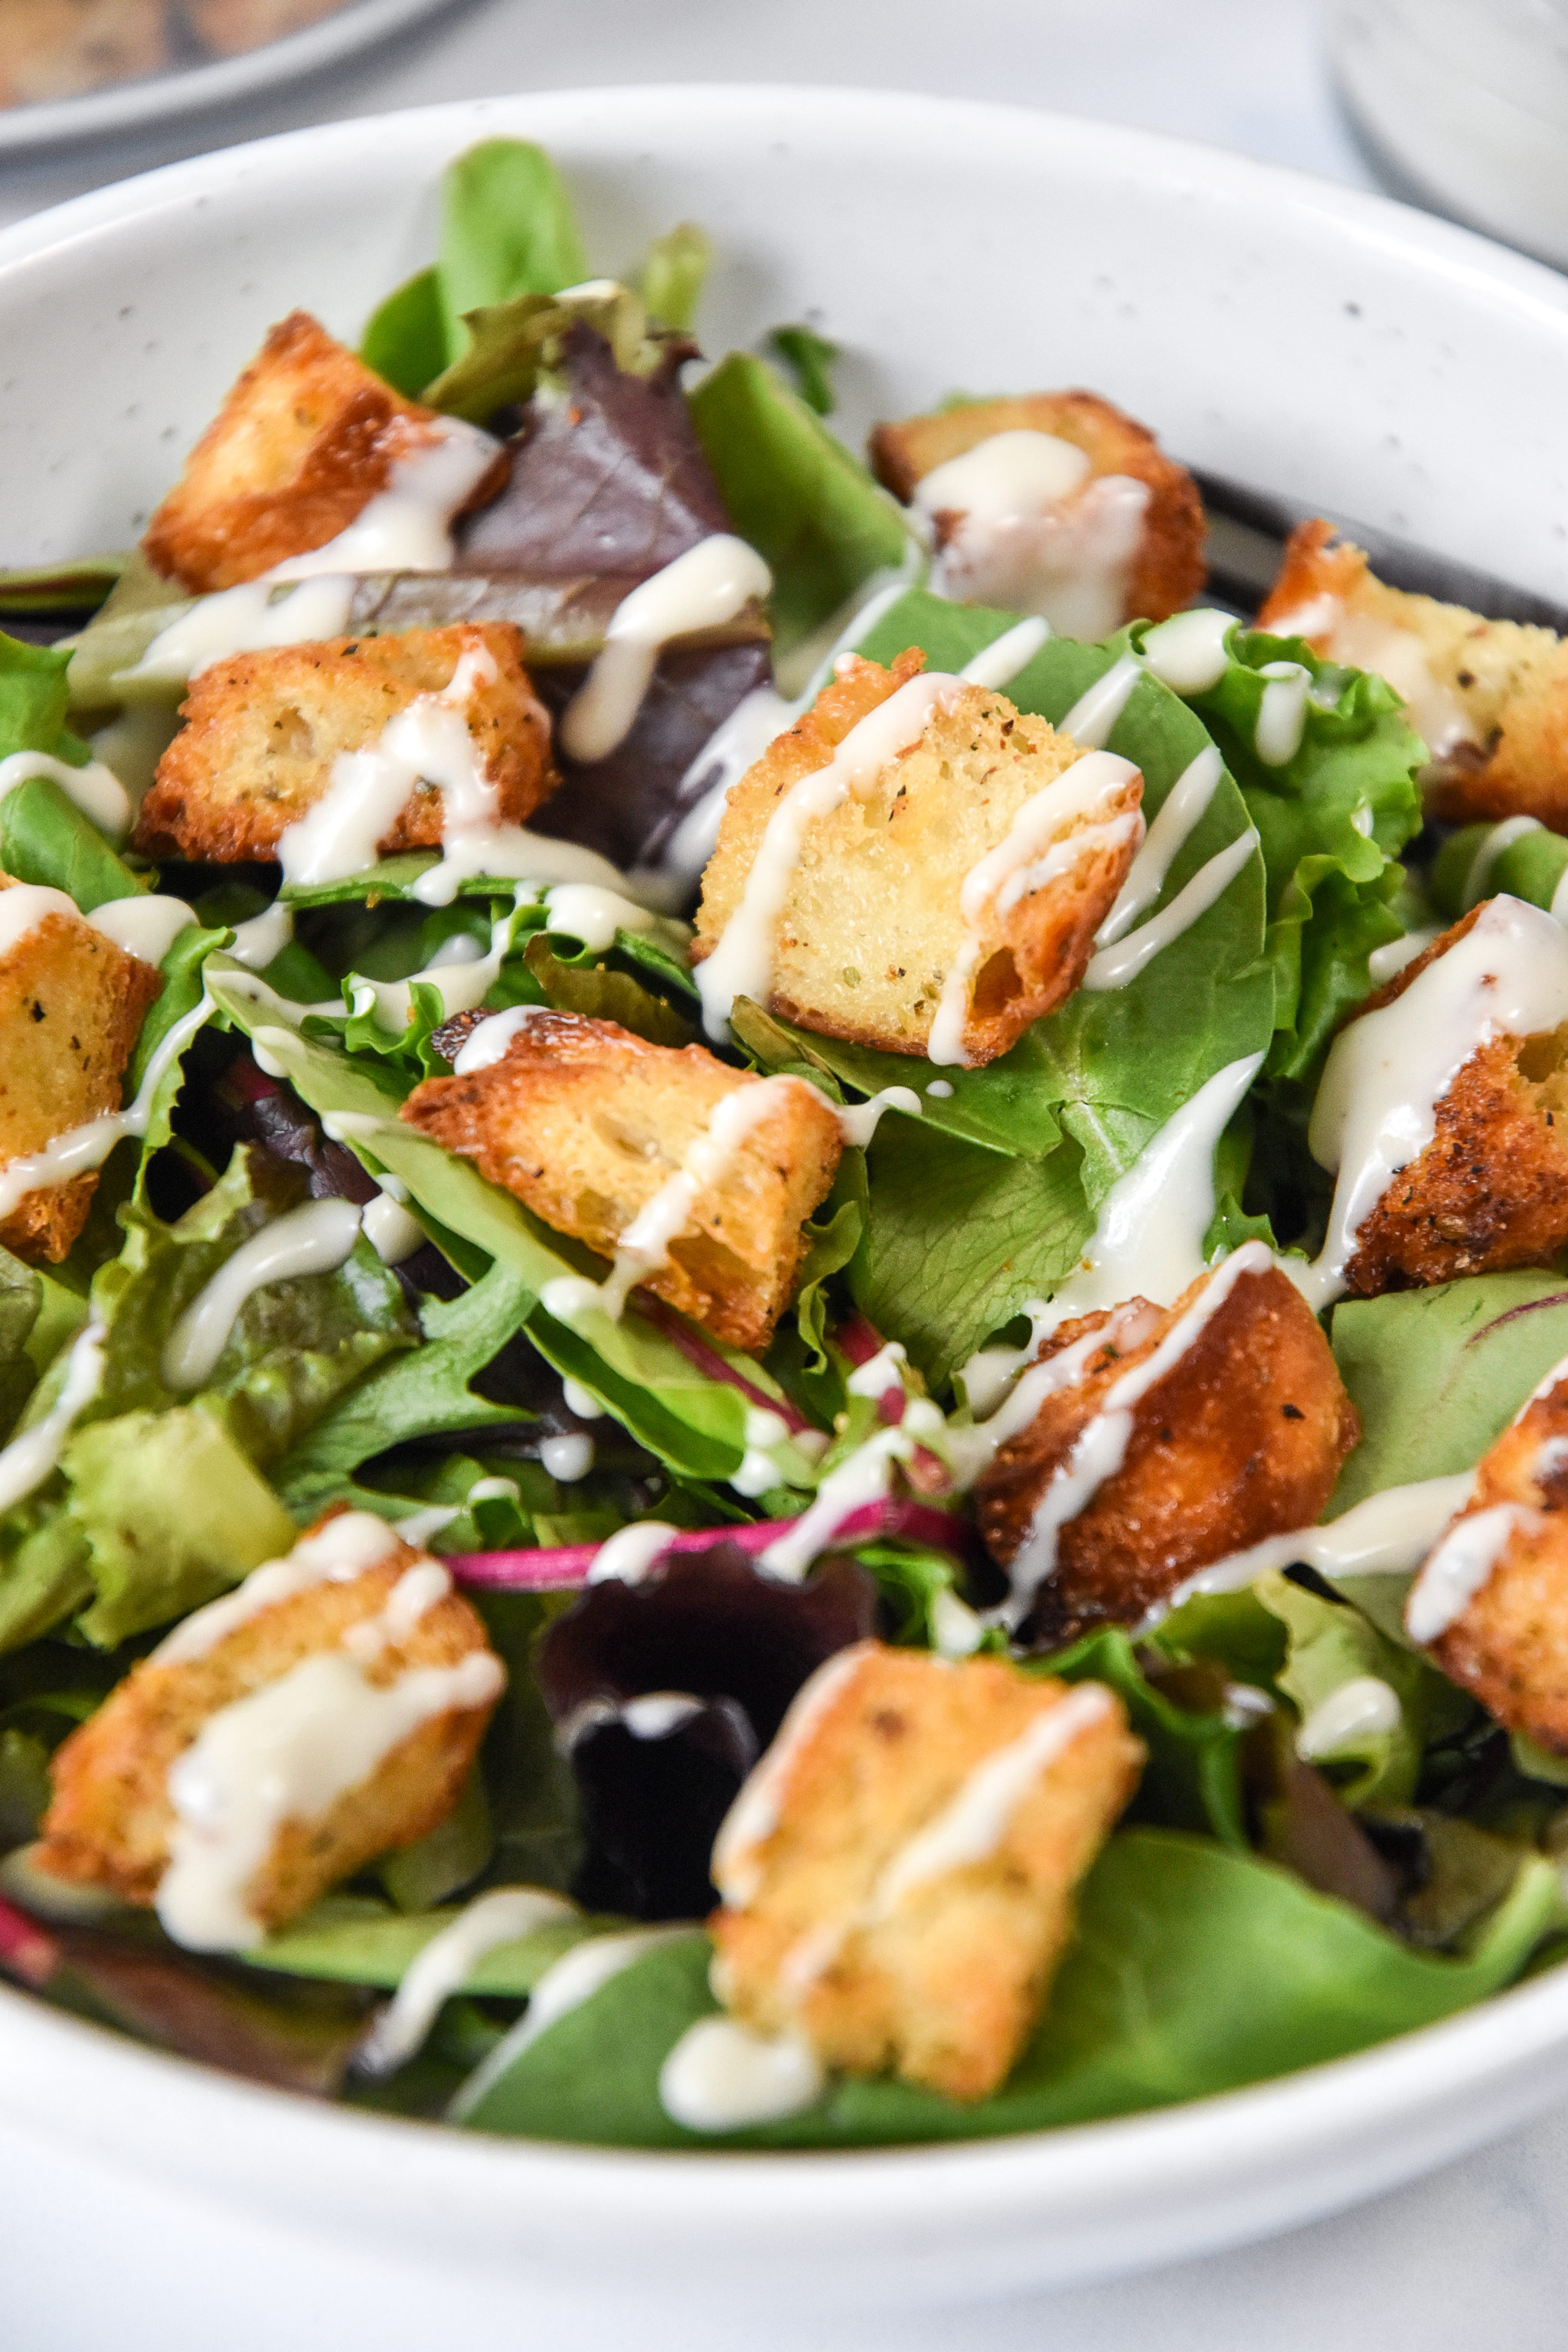 homemade croutons on top of a green salad with ranch drizzle.